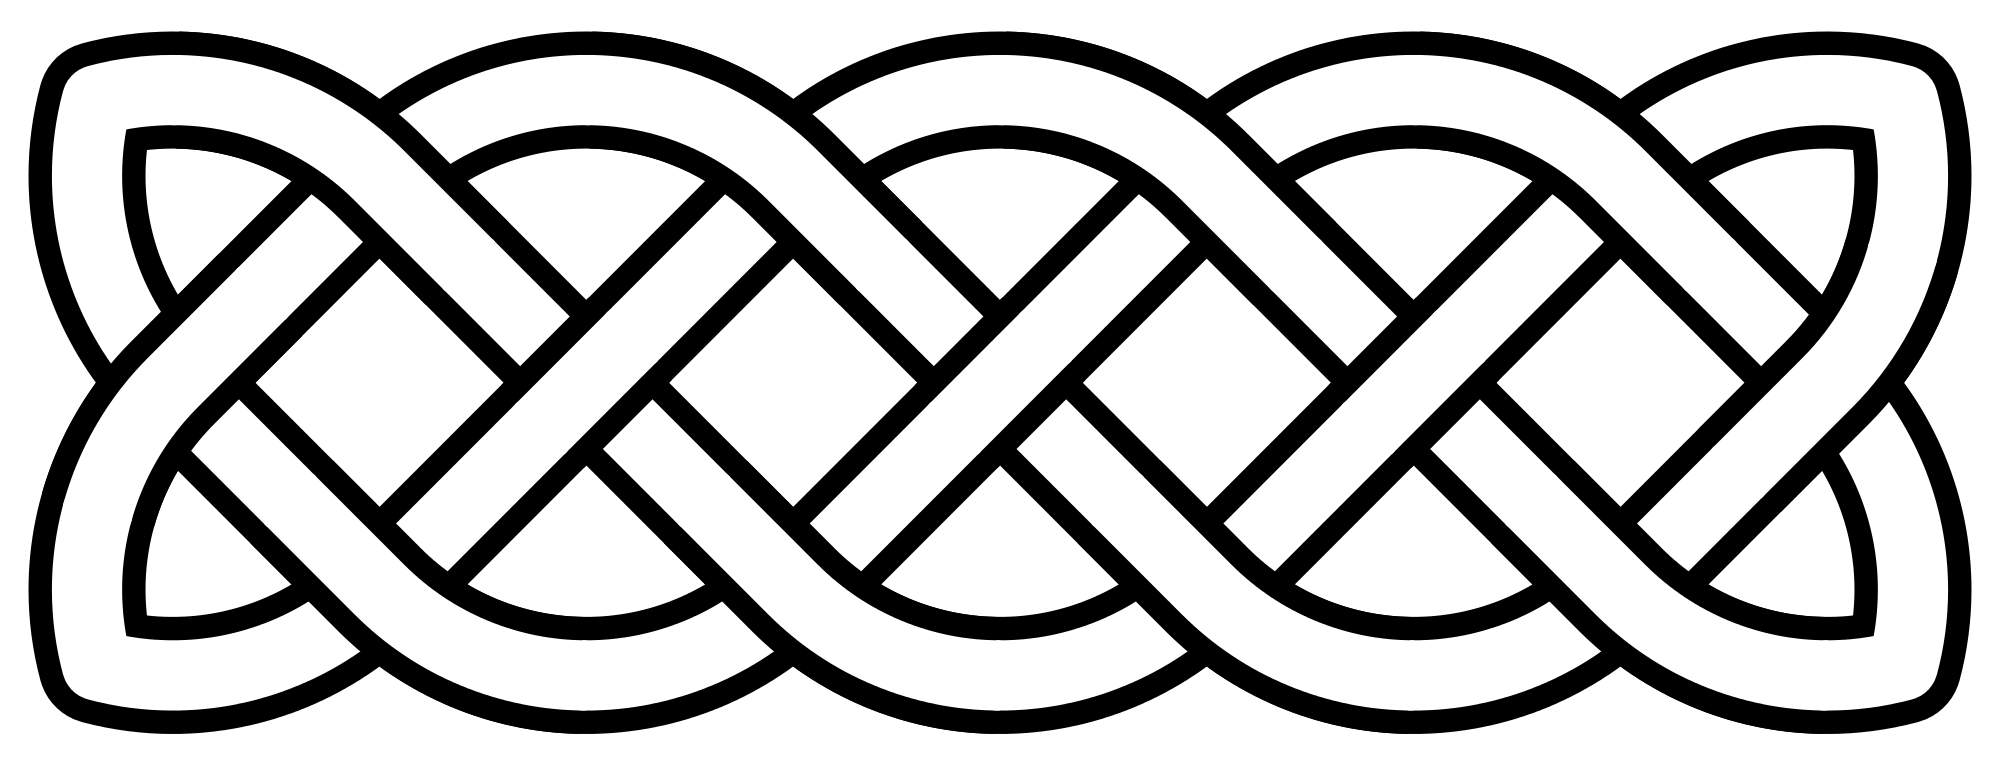 Images of Celtic Knot | 2000x763